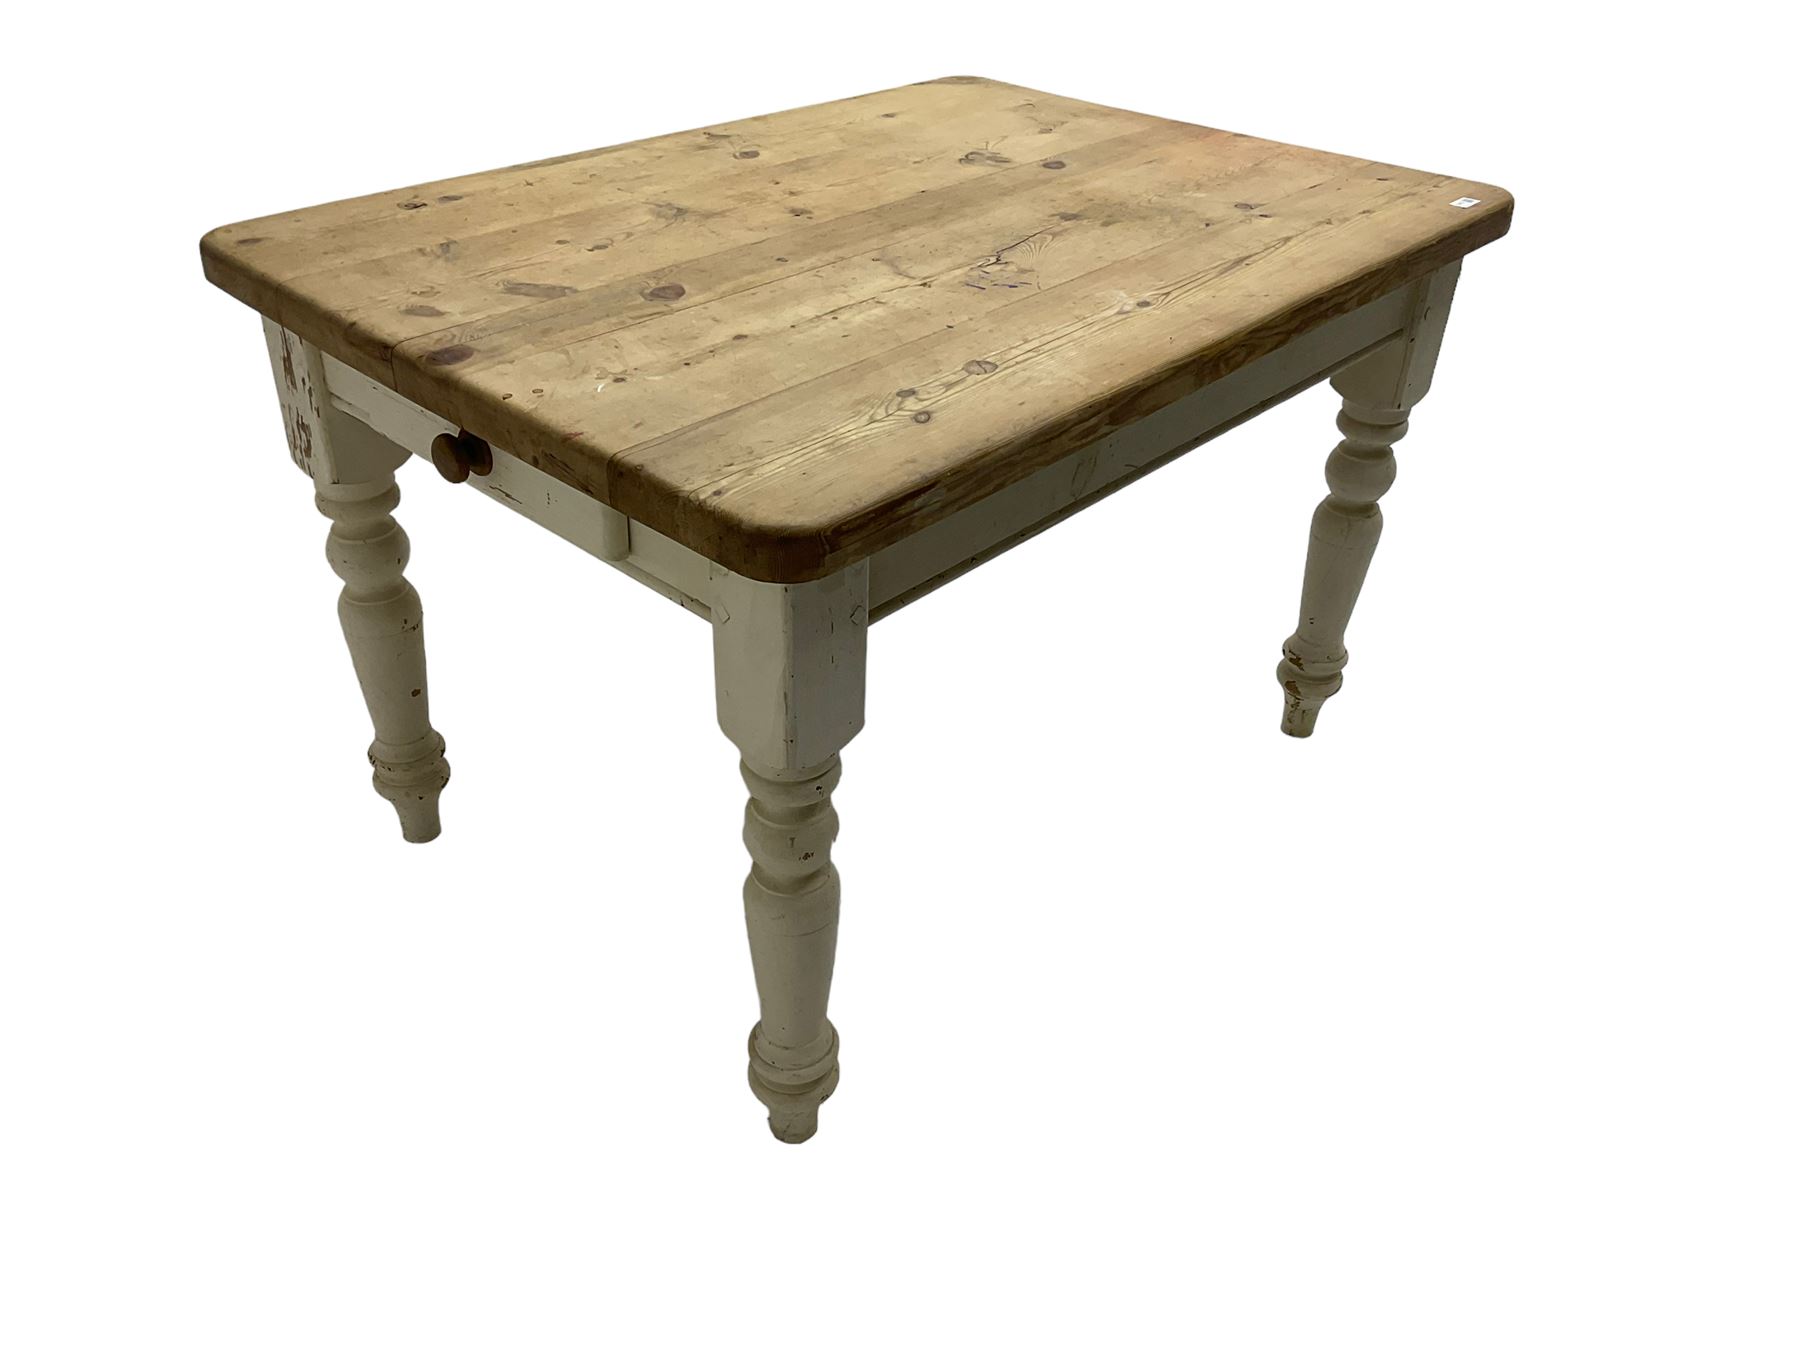 Traditional pine kitchen table with white painted base - Image 3 of 7